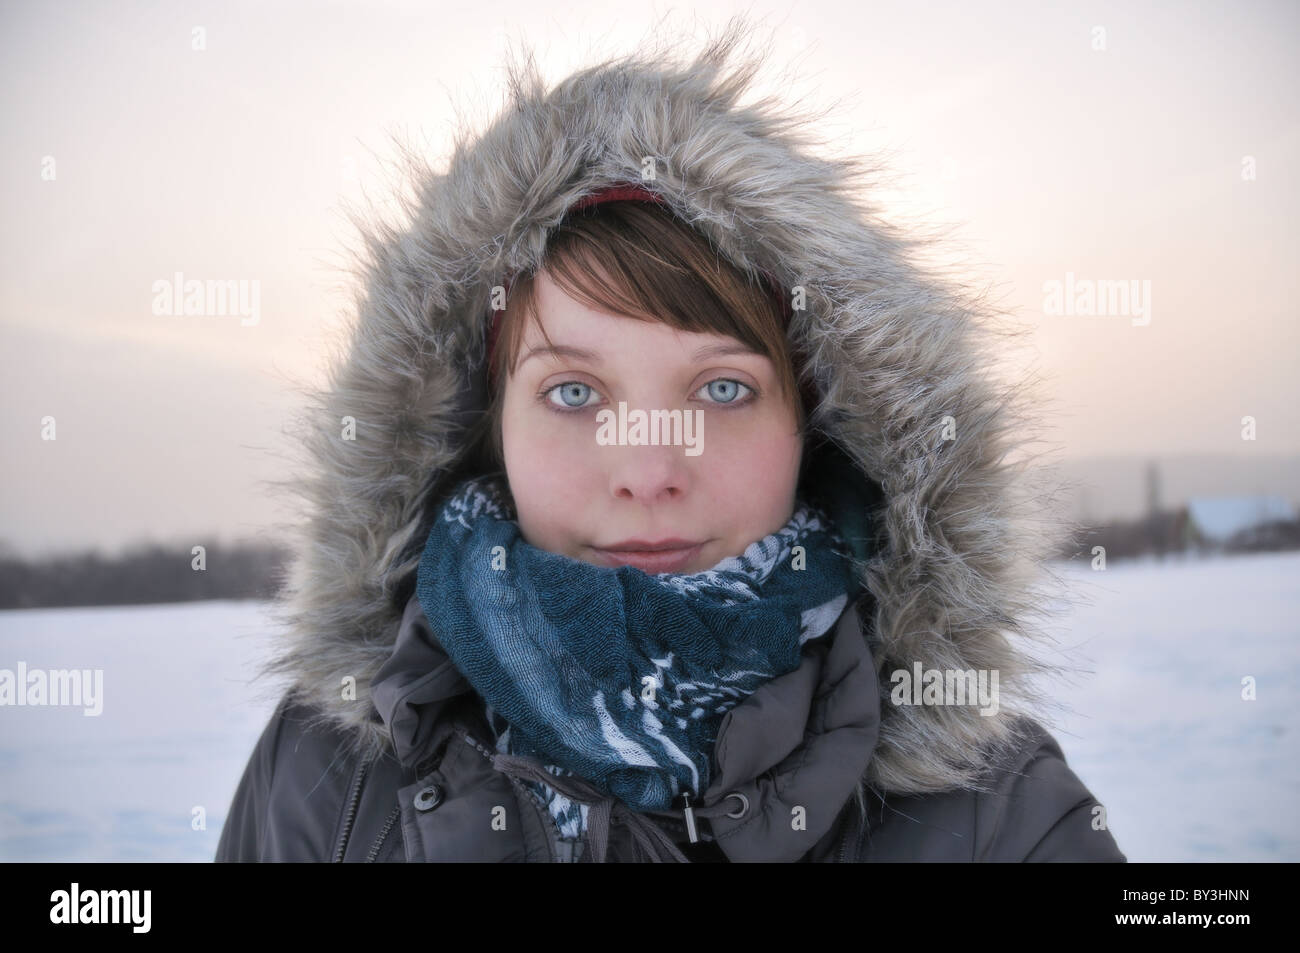 Woman with blue eyes wearing a hooded parka  in snow Stock Photo